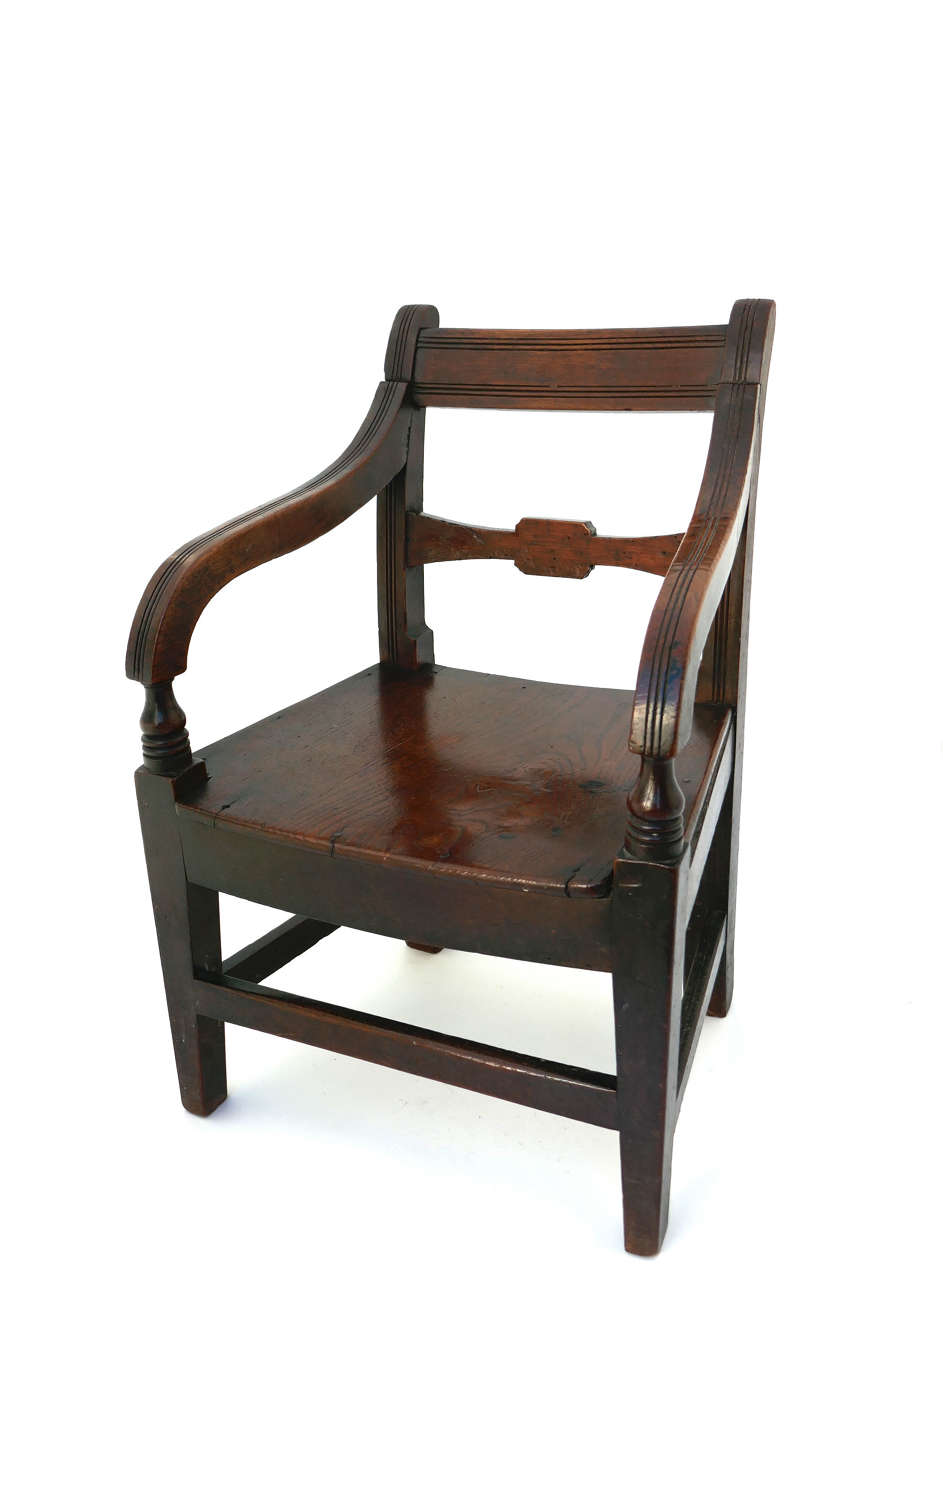 Antique Country Furniture 19thc Elm & Fruitwood Childs Regency Chair.